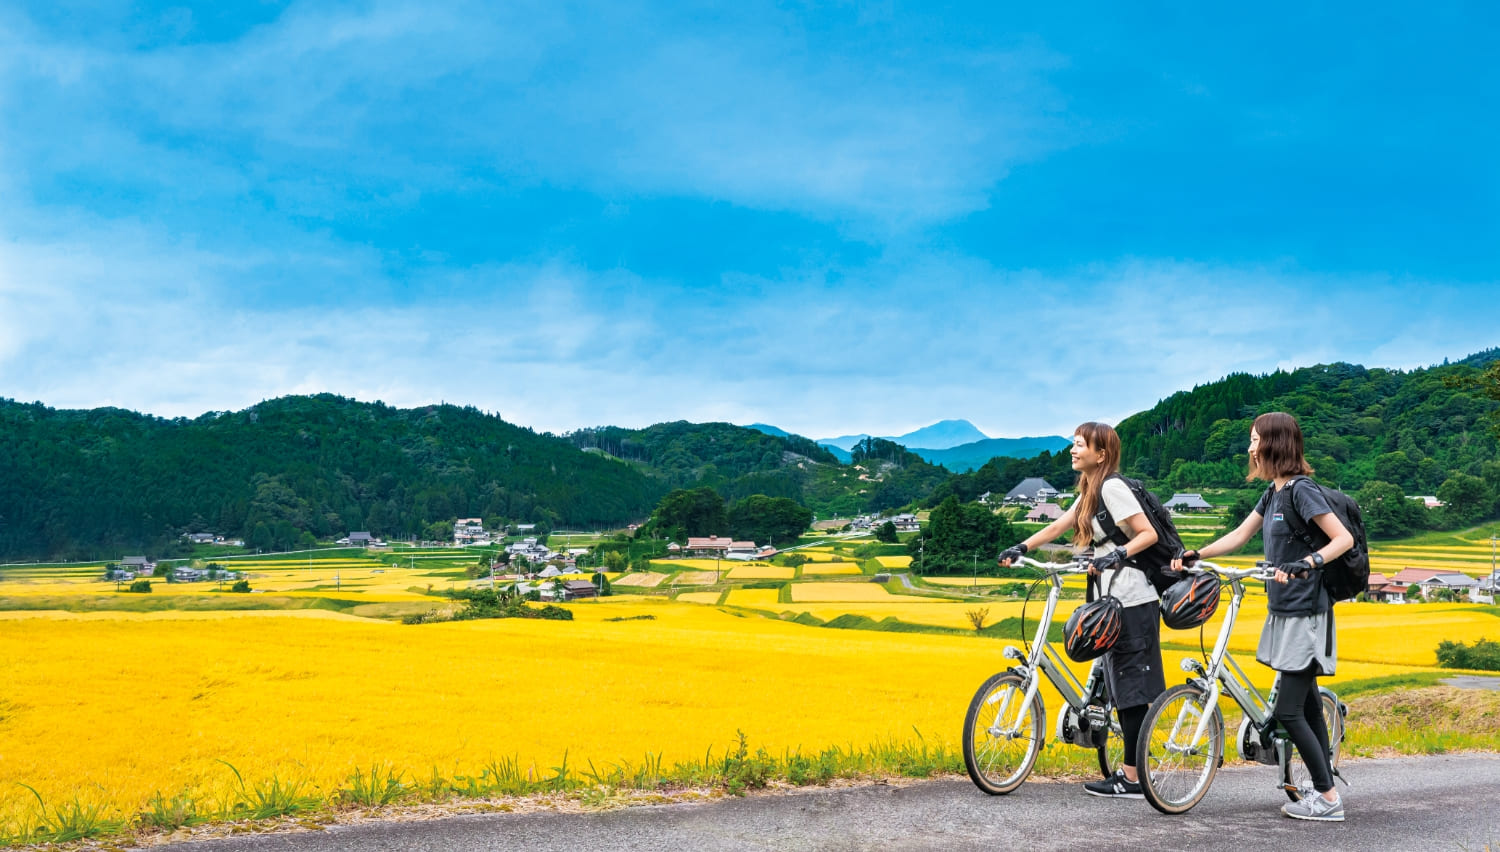 Cycle Through a Beautiful Mountain Village Around the Accommodation with E-bike